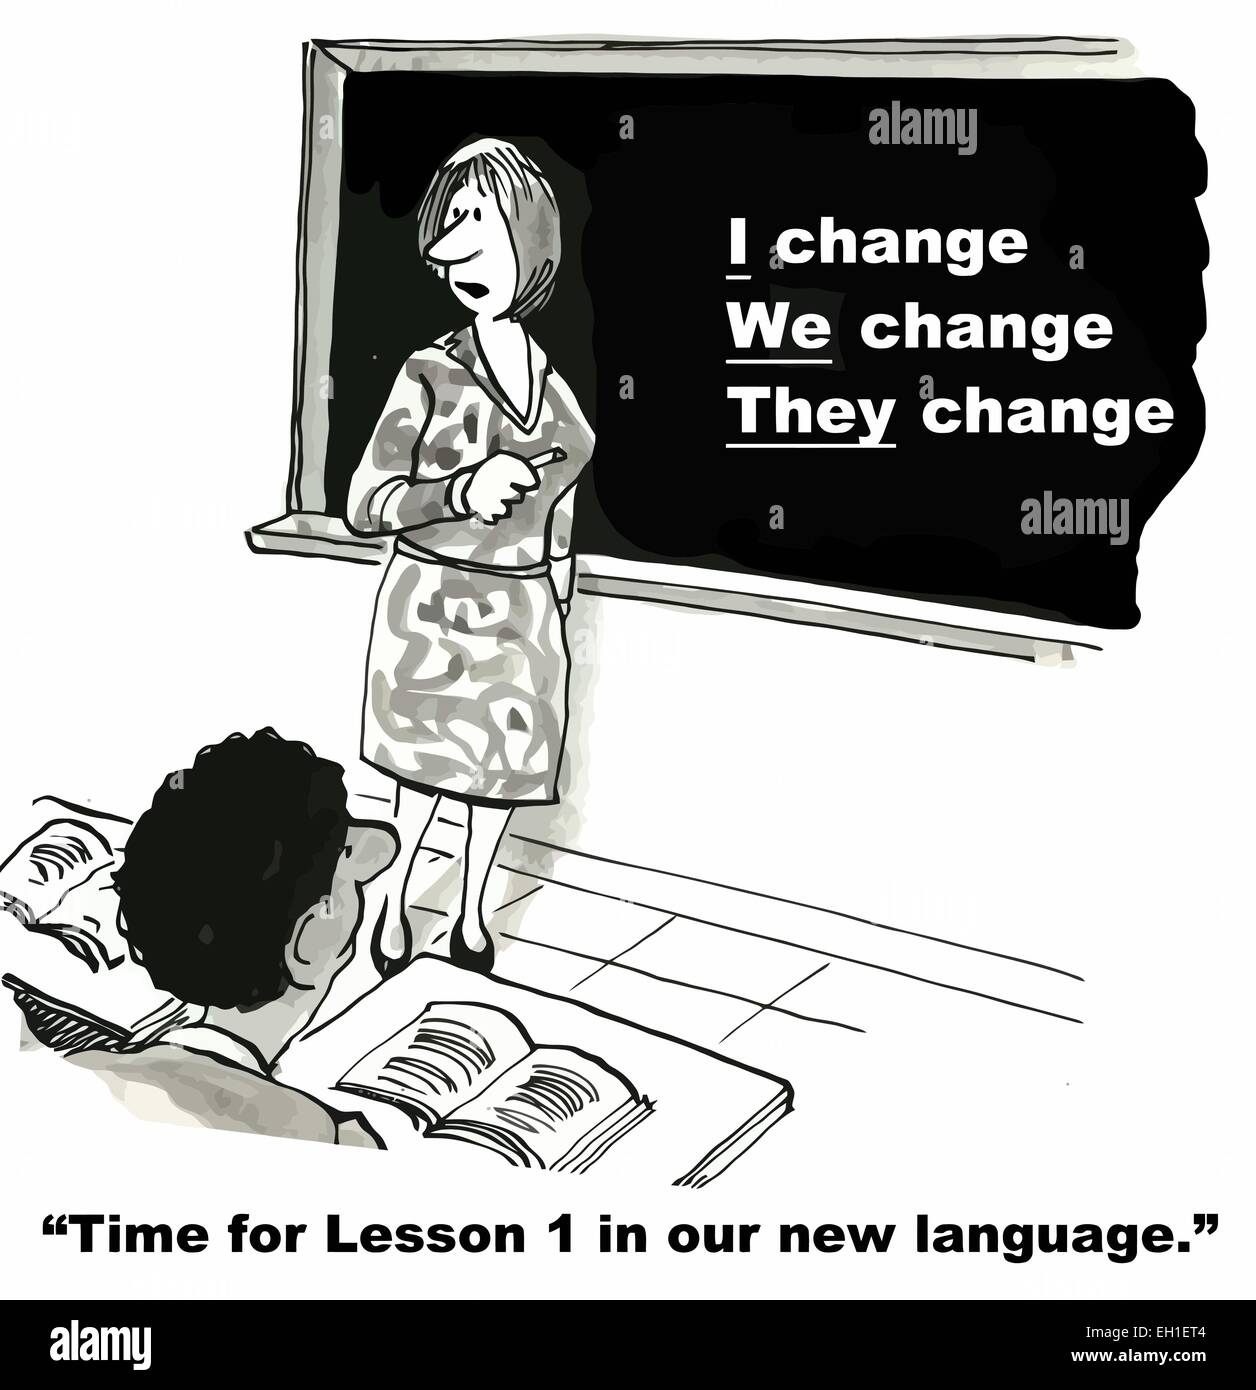 Cartoon on change management business seminar - a new language - I, we, they change. Stock Vector